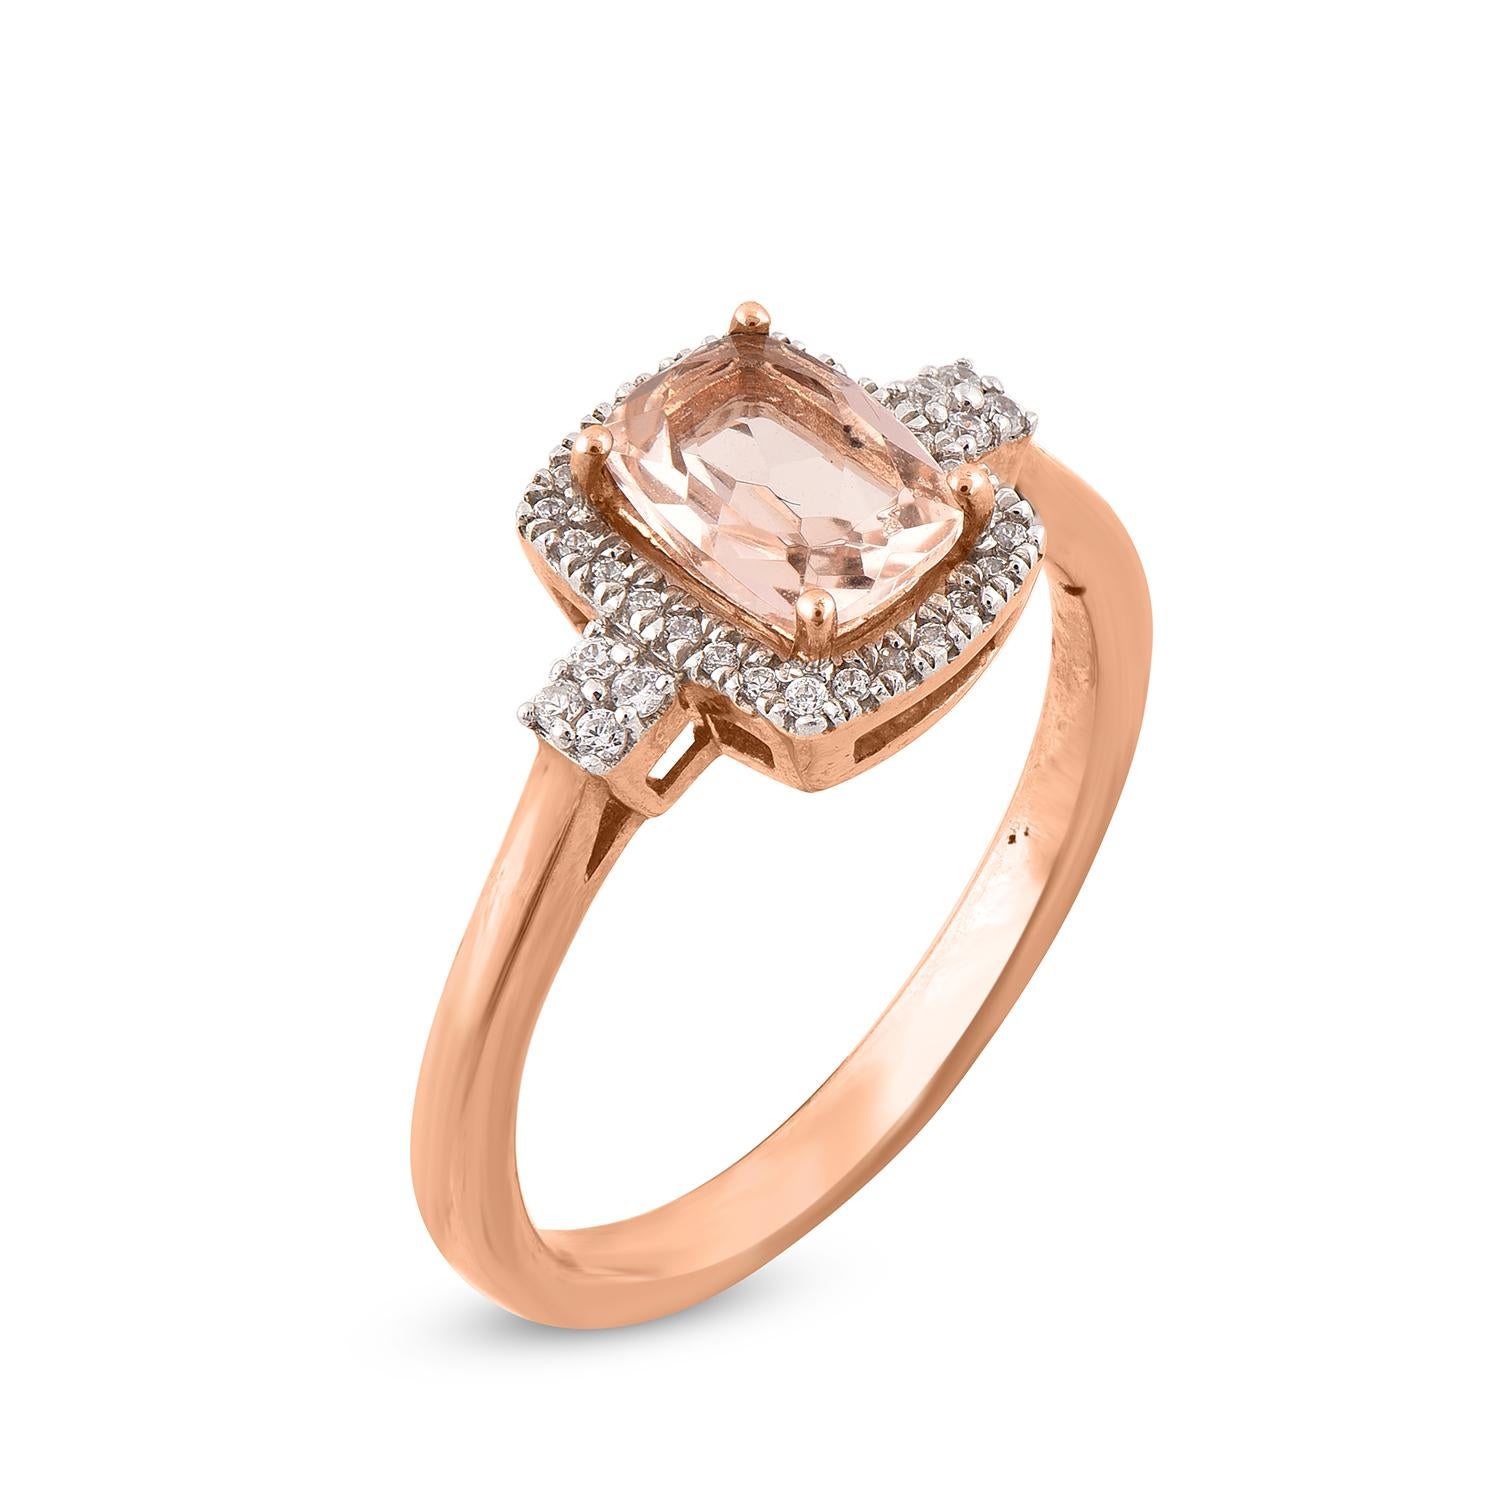 Wear this ring with pride knowing you're the special.This stunning ring is embedded with 34 white round diamonds and centered cushion shape morganite gemstone in prong setting and designed by experts in 14 karat rose gold. Diamonds are graded H-I